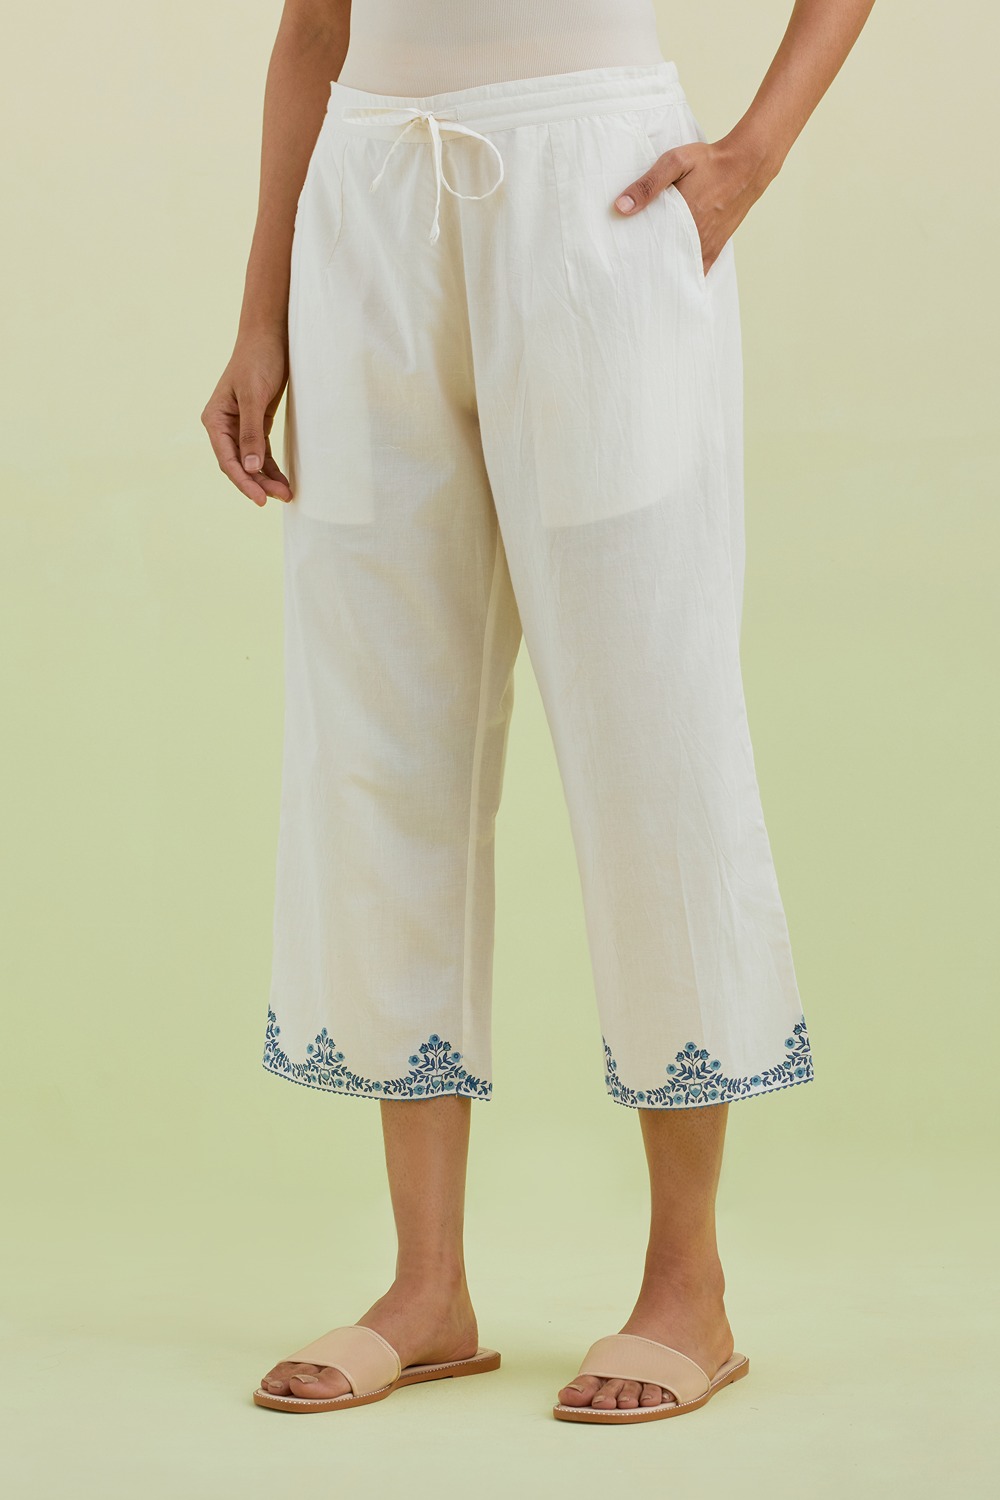 Off White Straight Ankle Length Pants With Blue Colored Hand-Block Printed Border At Hem